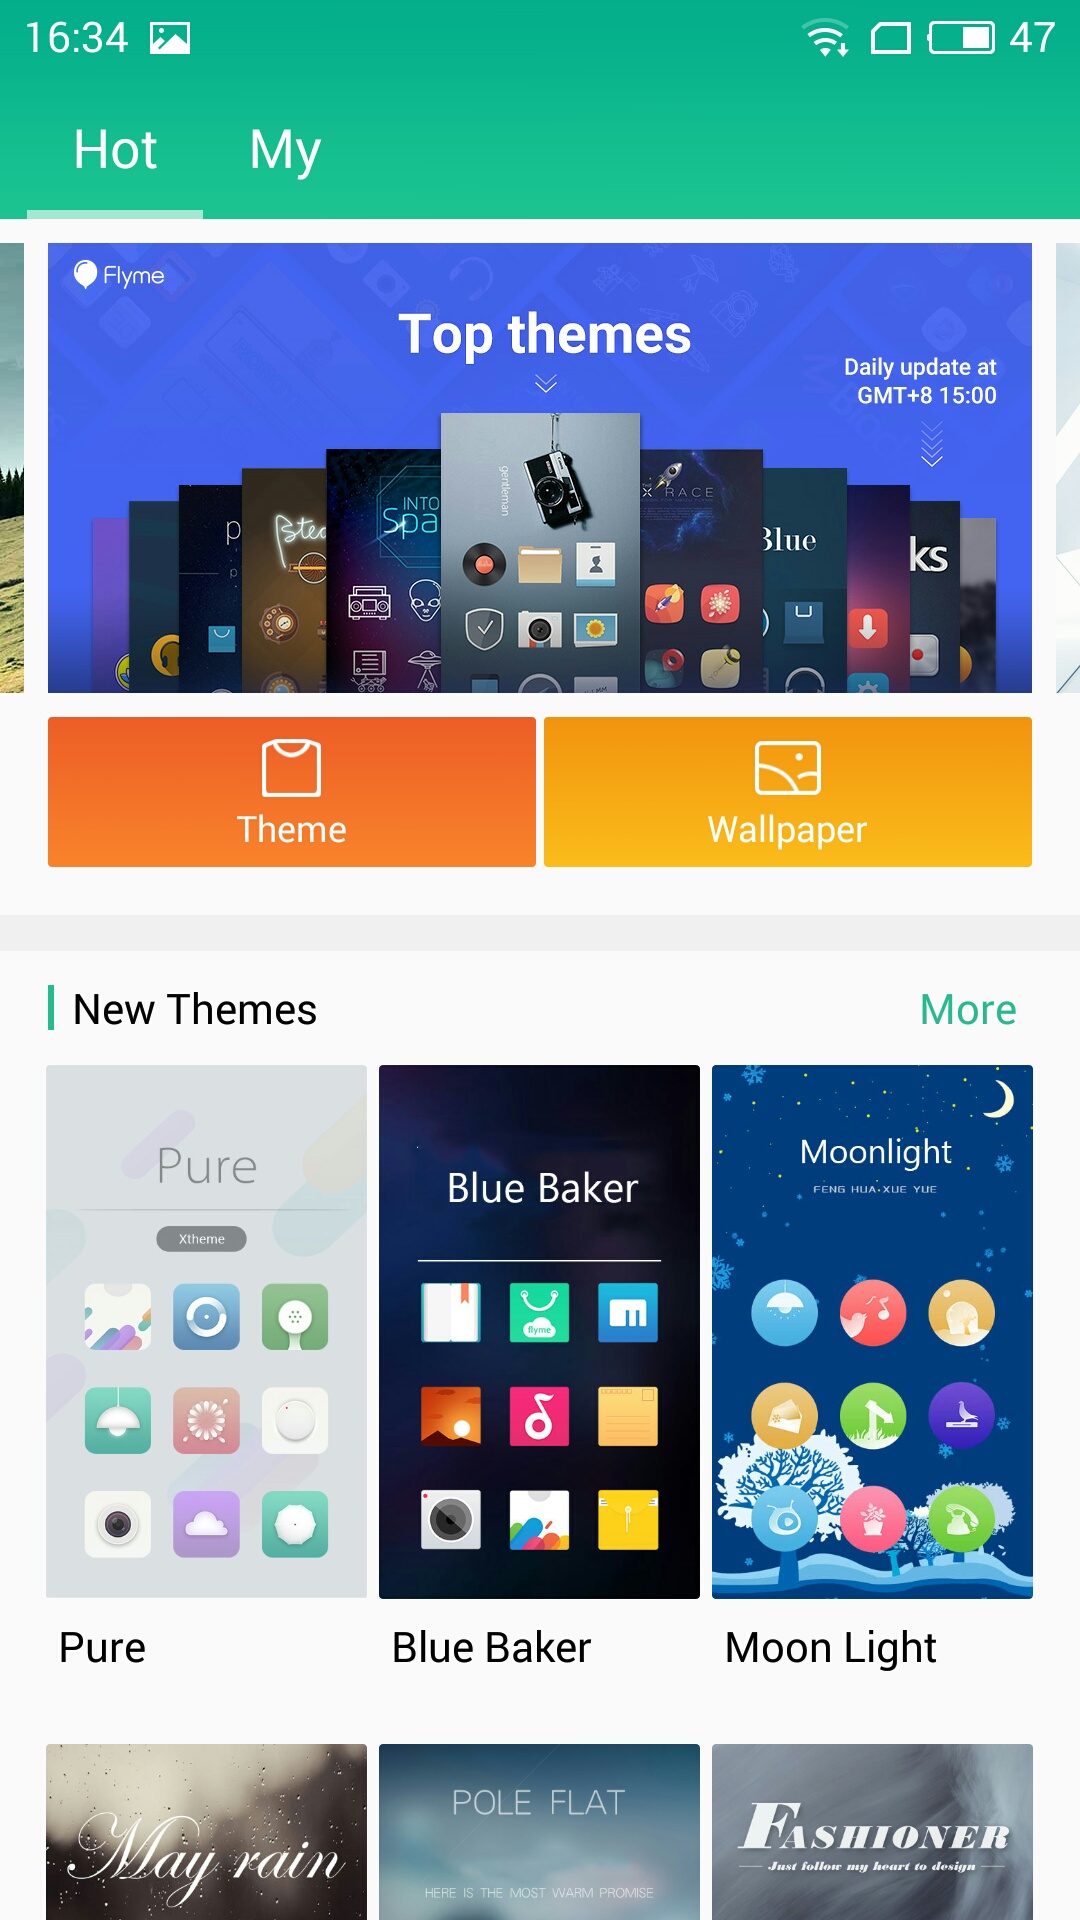 meizu_m3_note_flyme_article_12